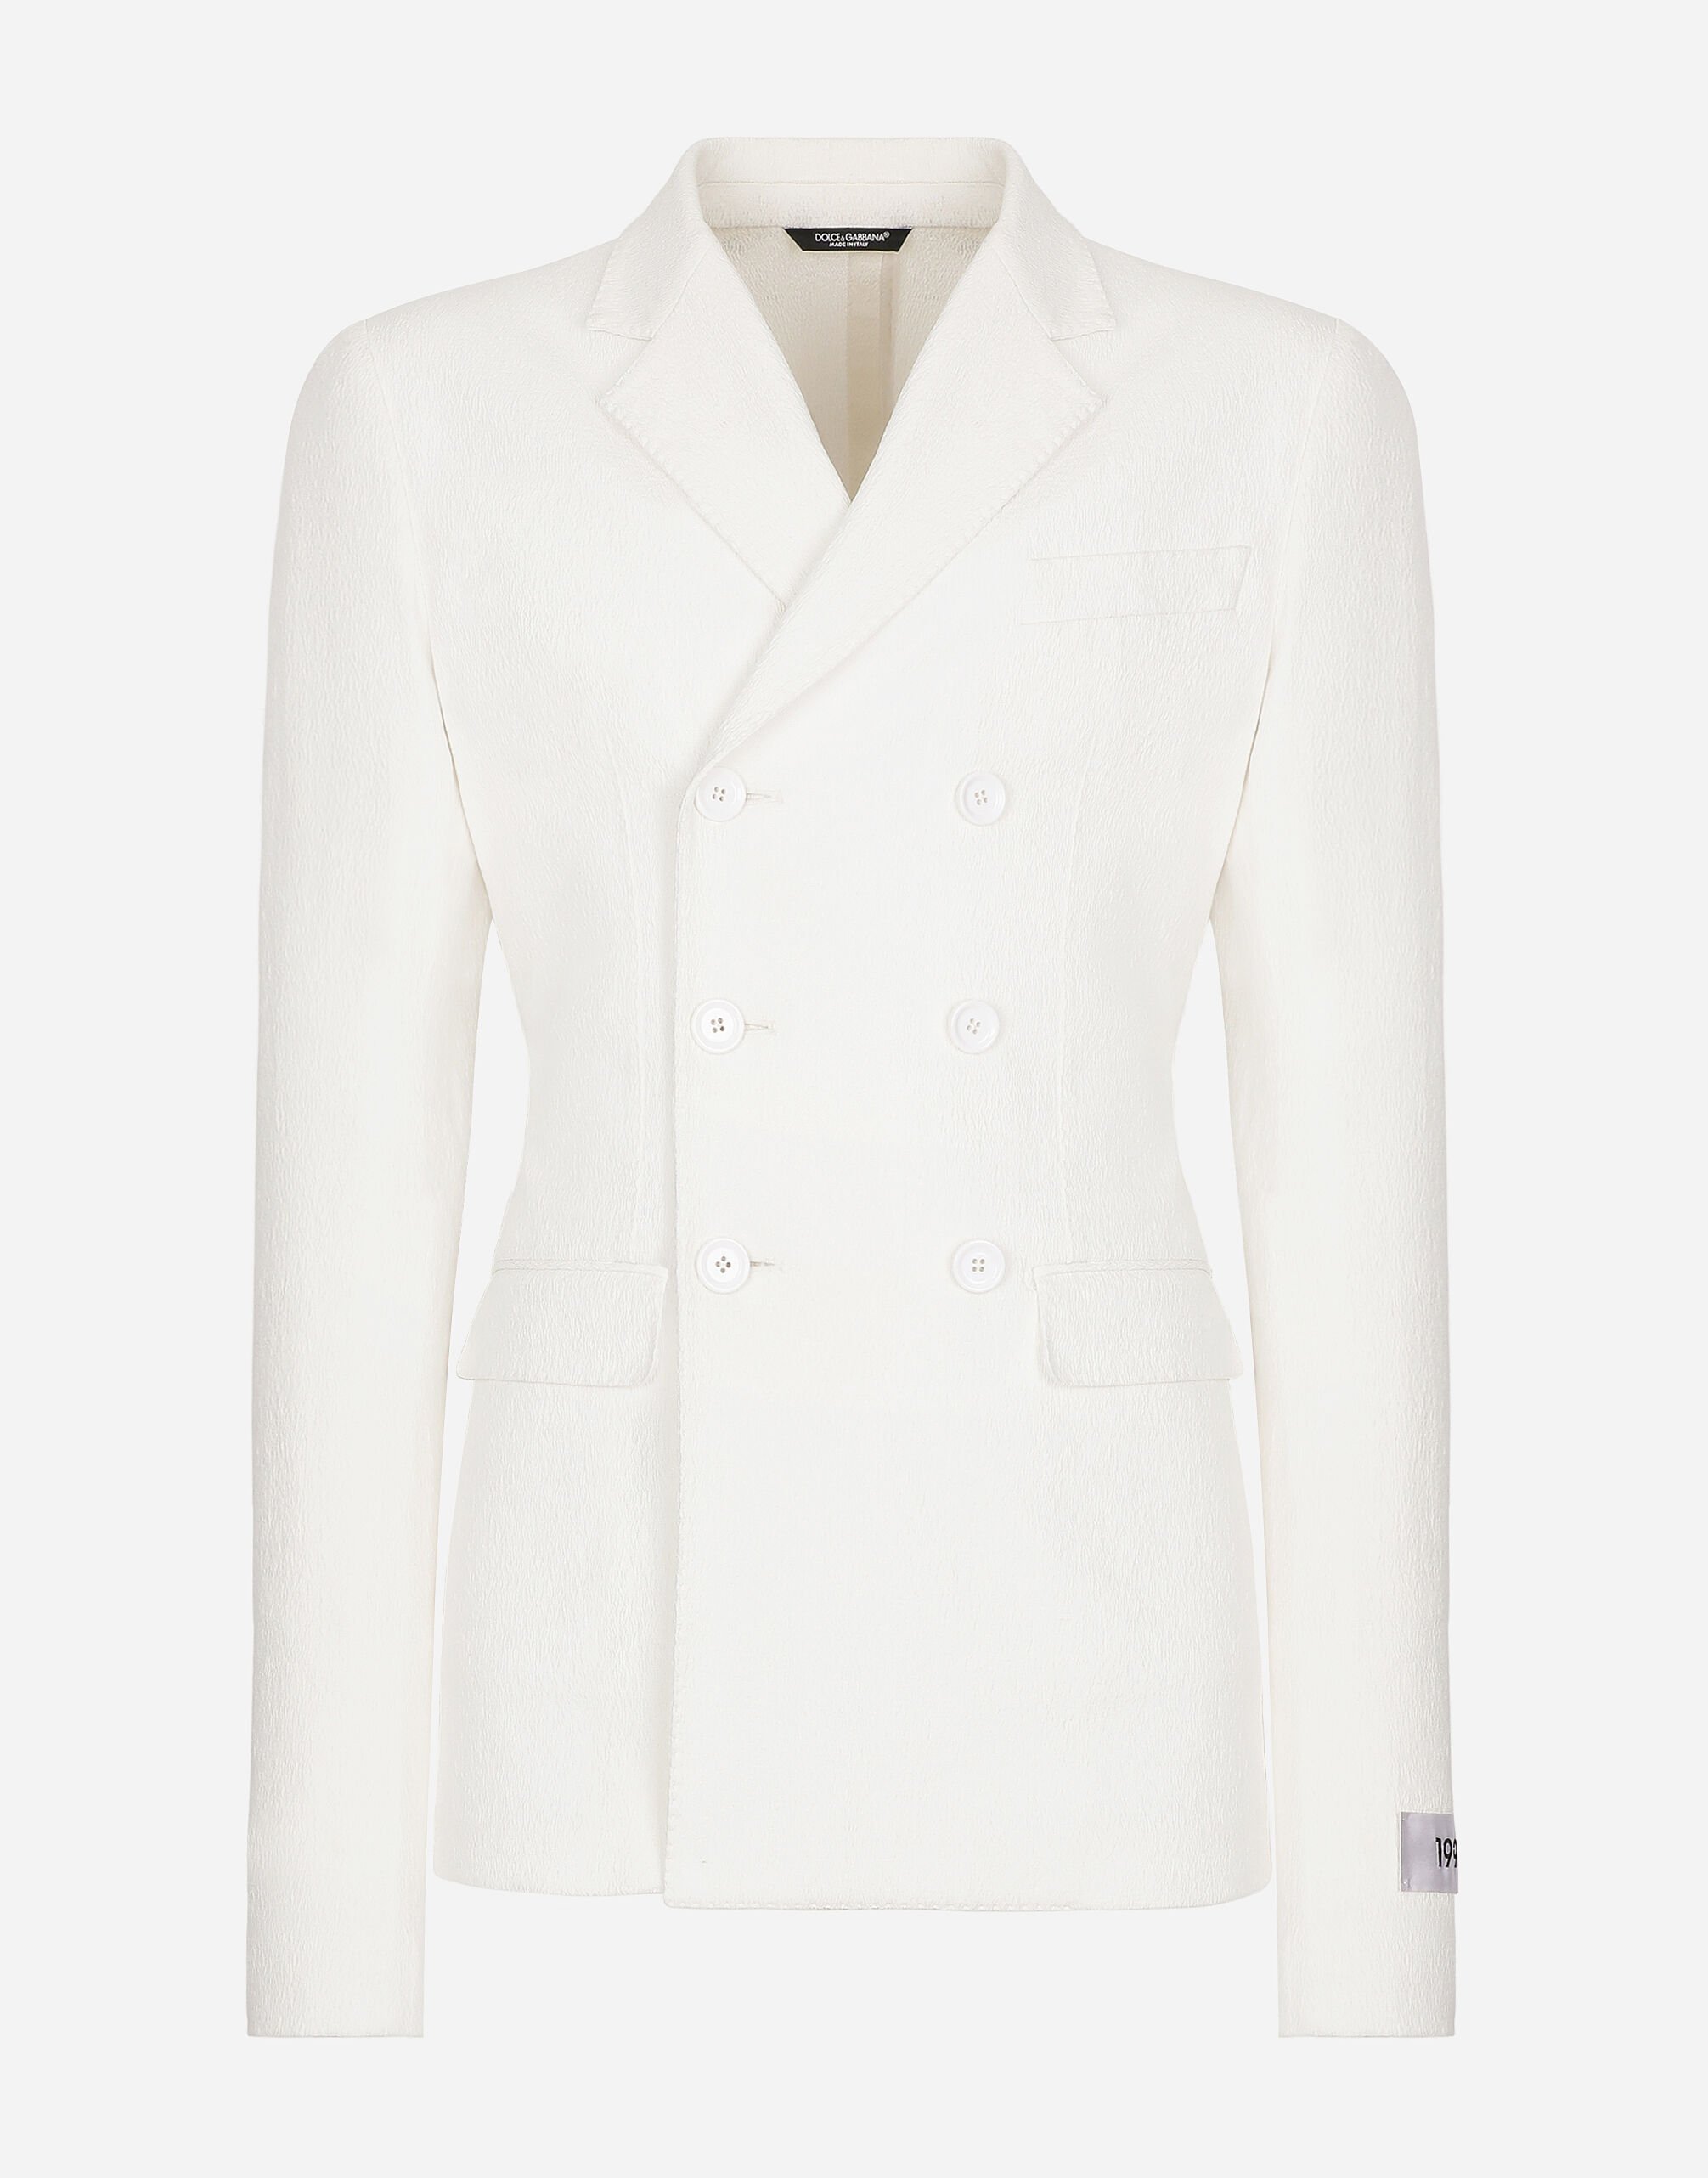 Dolce & Gabbana Fitted single-breasted stretch cotton jacket White G2NW1TFU4DV